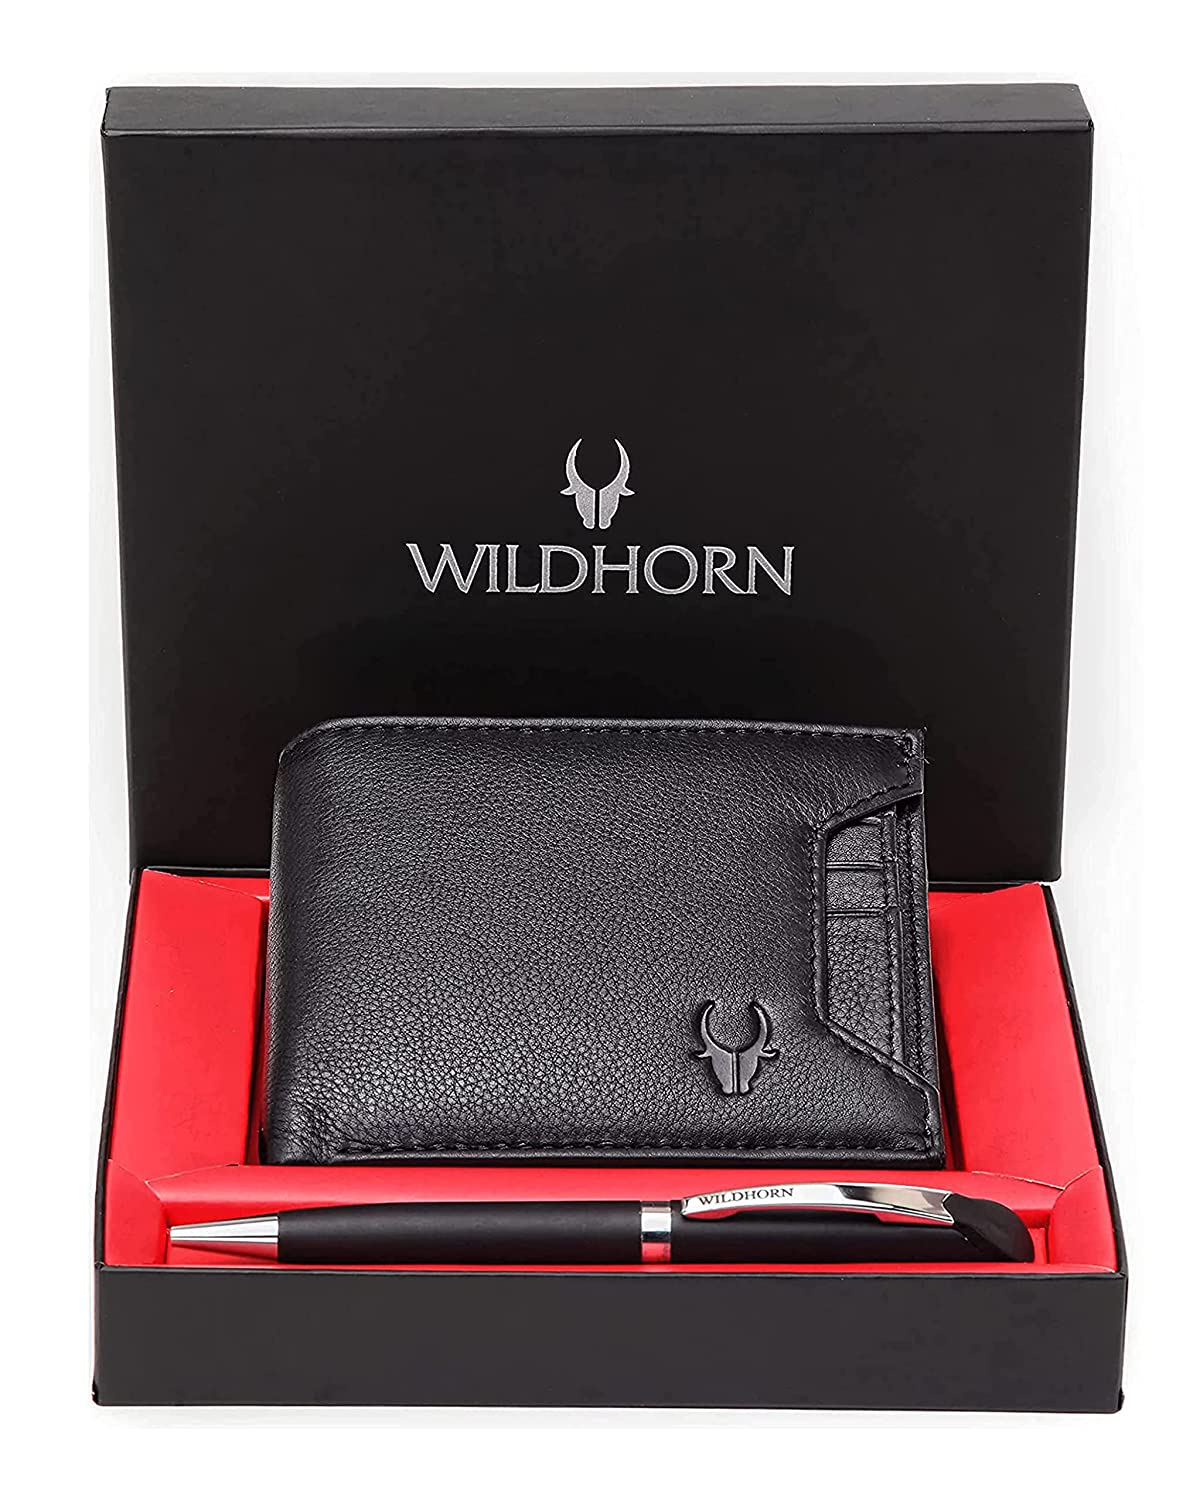 WILDHORN black leather wallet and pen combo